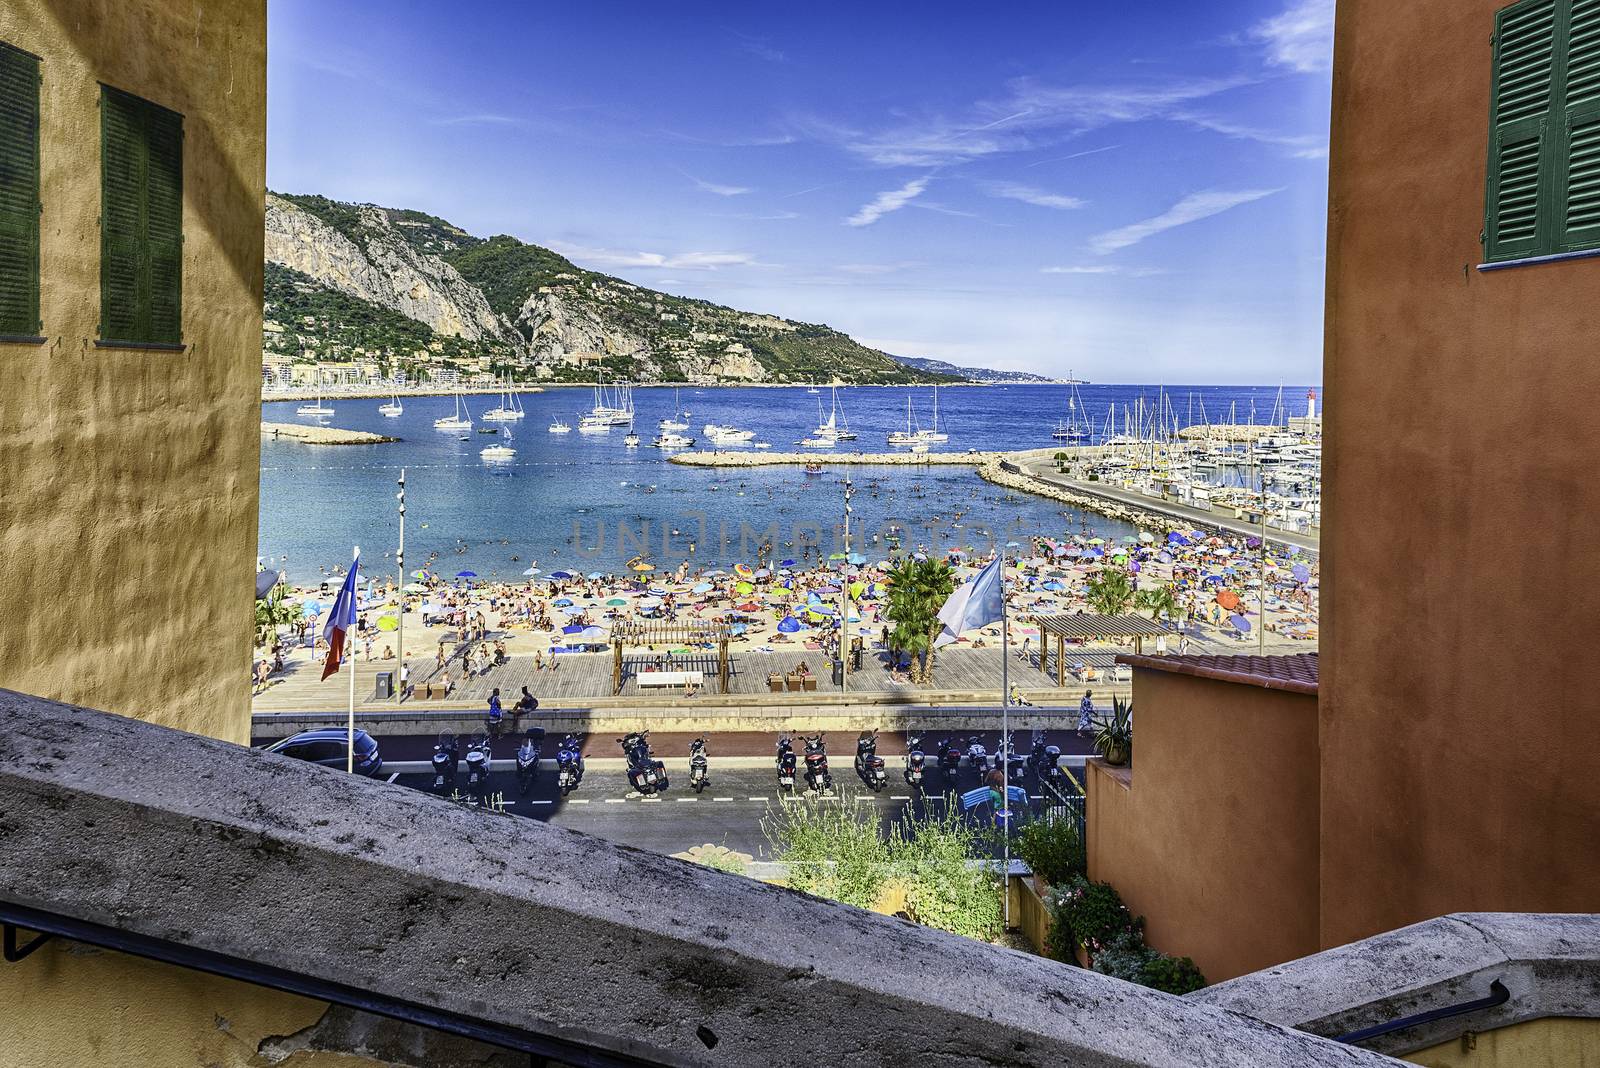 Scenic view over the beach in the city centre of Menton, Cote d'Azur, France, with the Italian coastline in the background